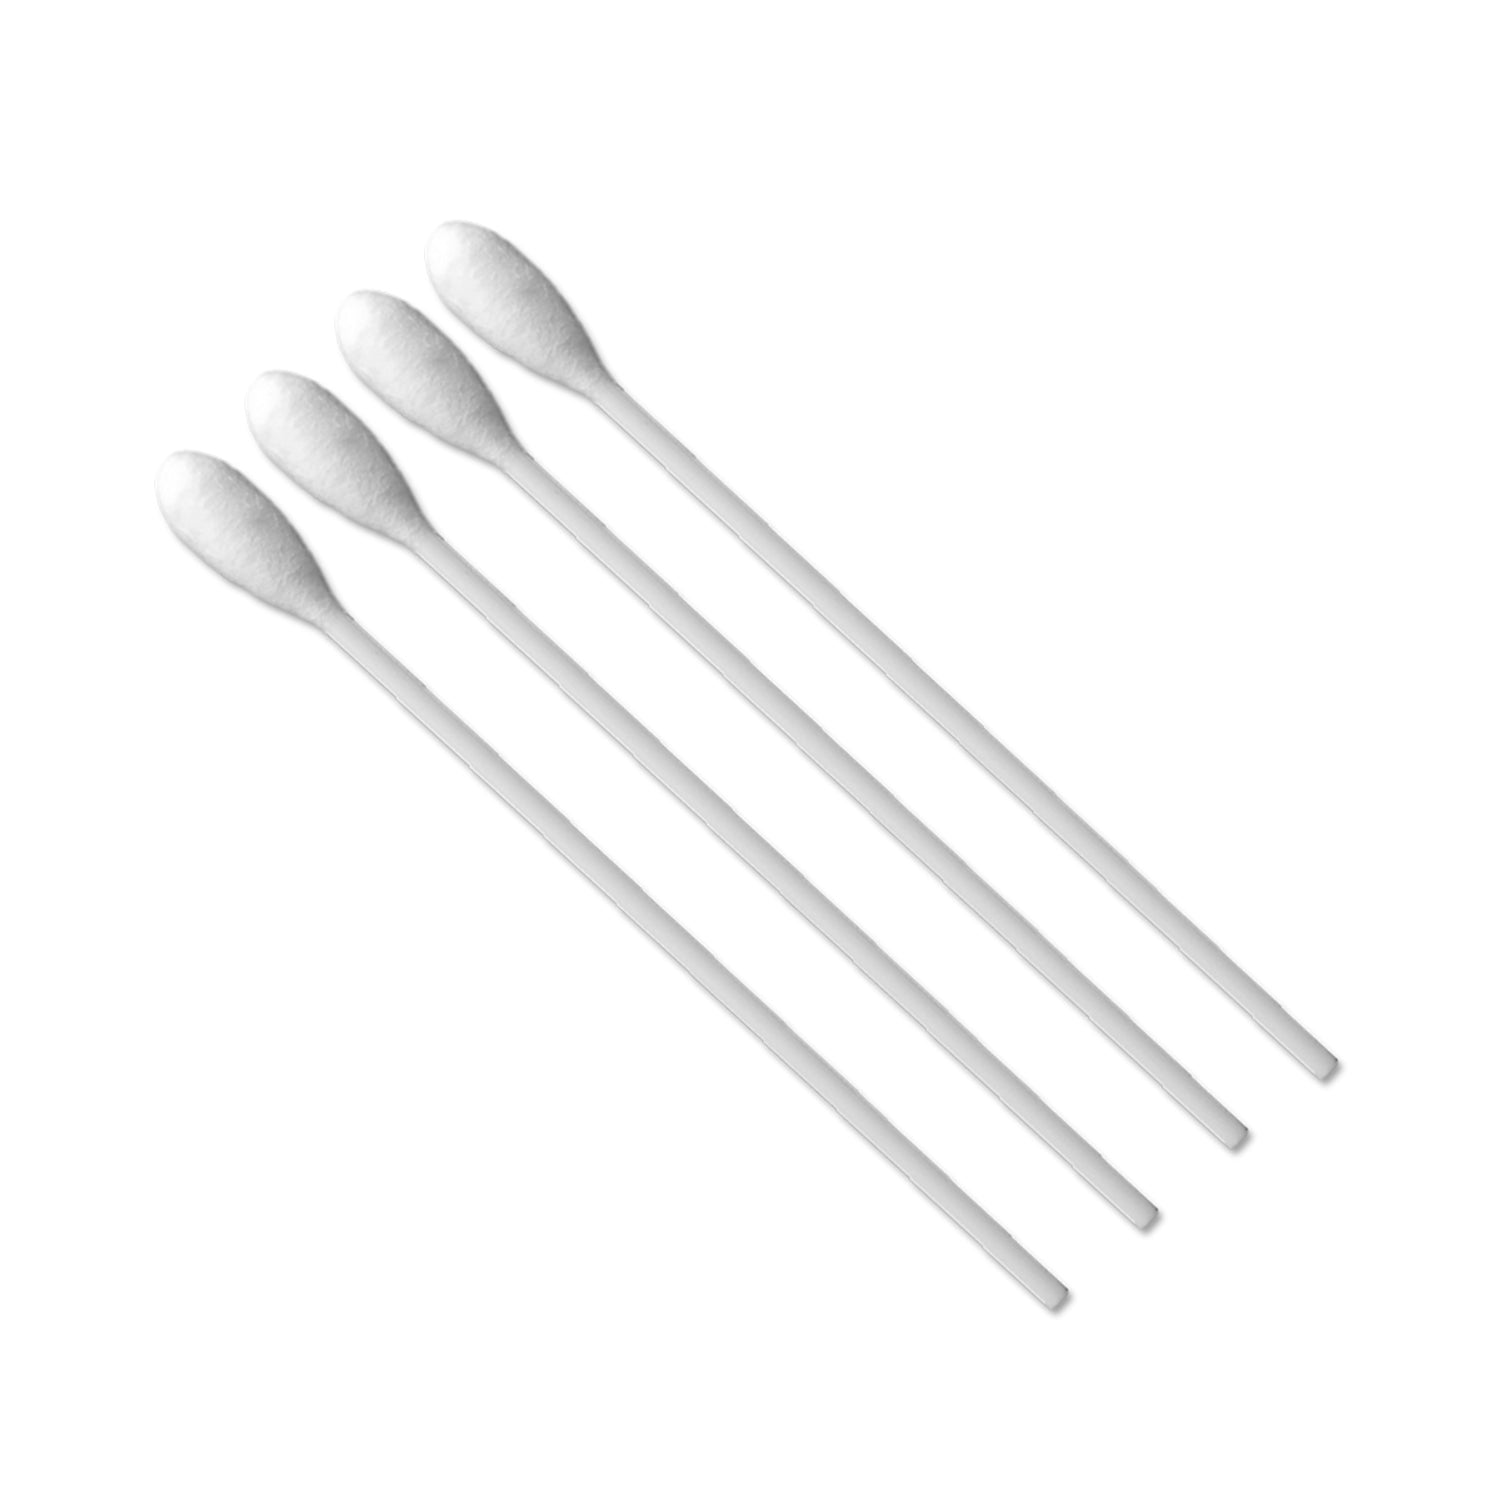 Cryospray 59 Cotton Tipped Applicators | Pack of 12 (3)